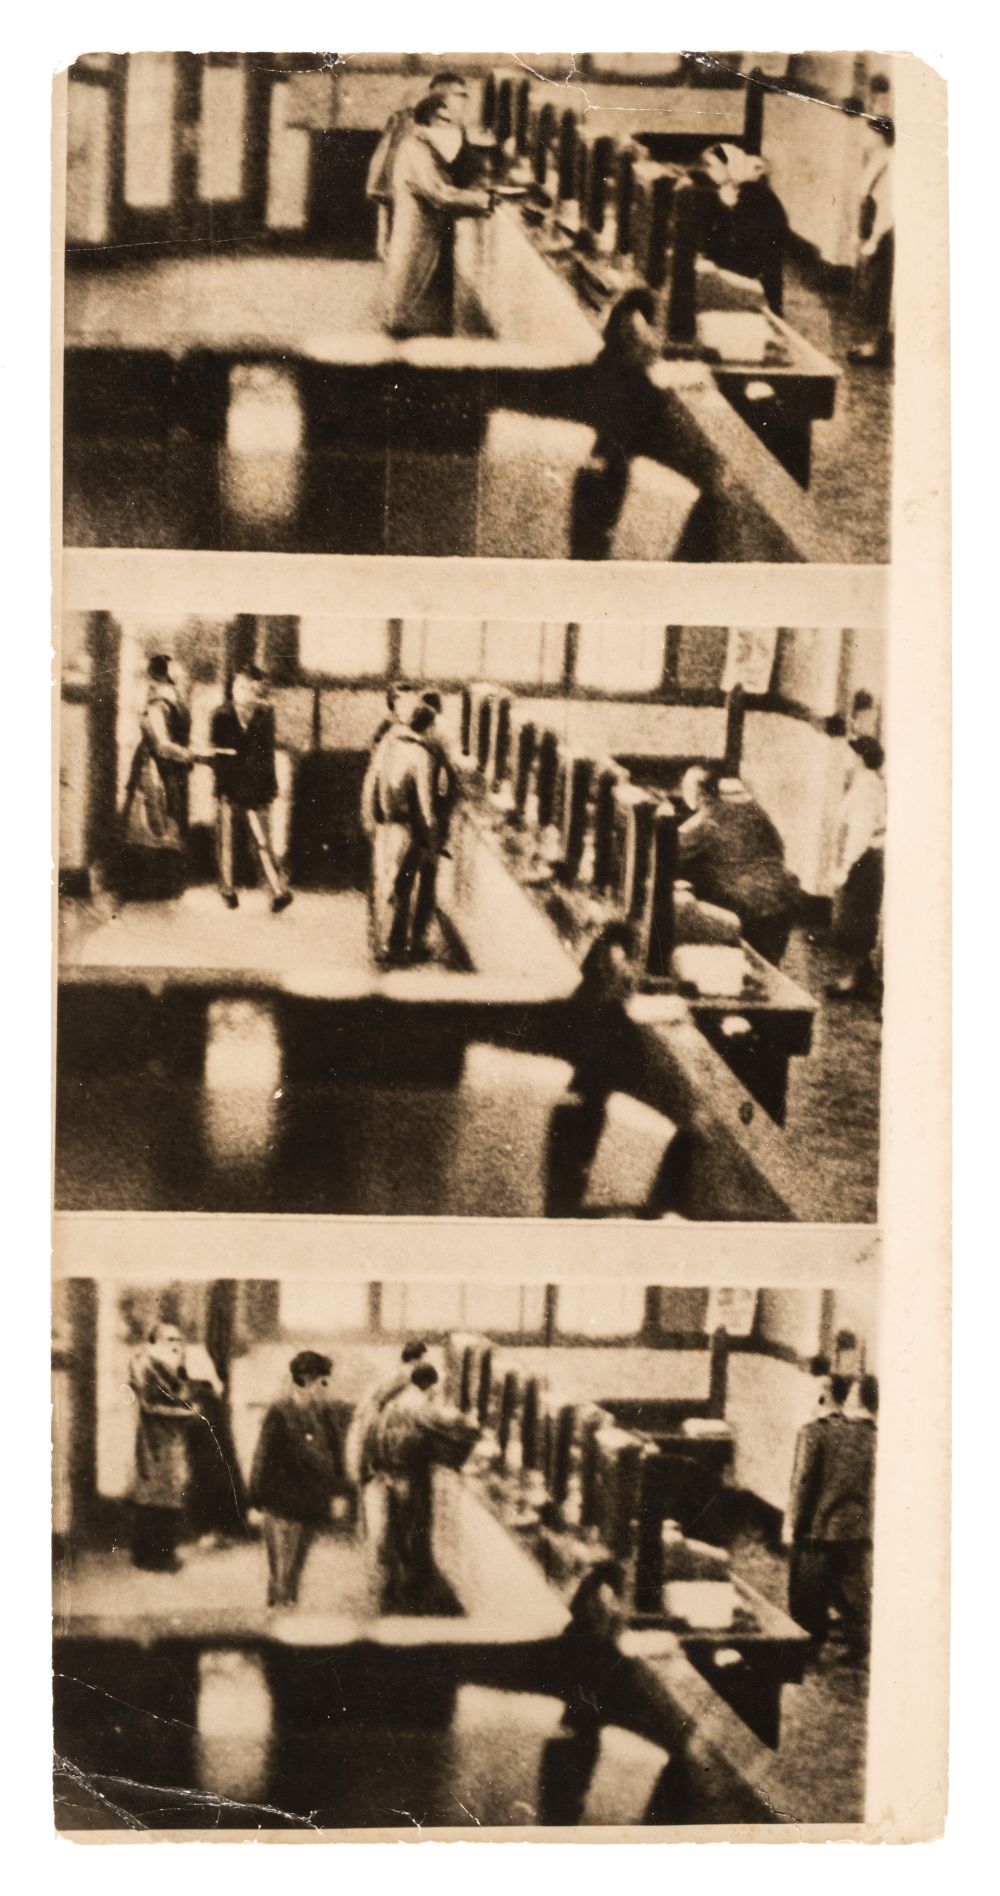 Cleveland Bank Robbery. Three film stills of a bank robbery at St Clair Savings and Loan Company